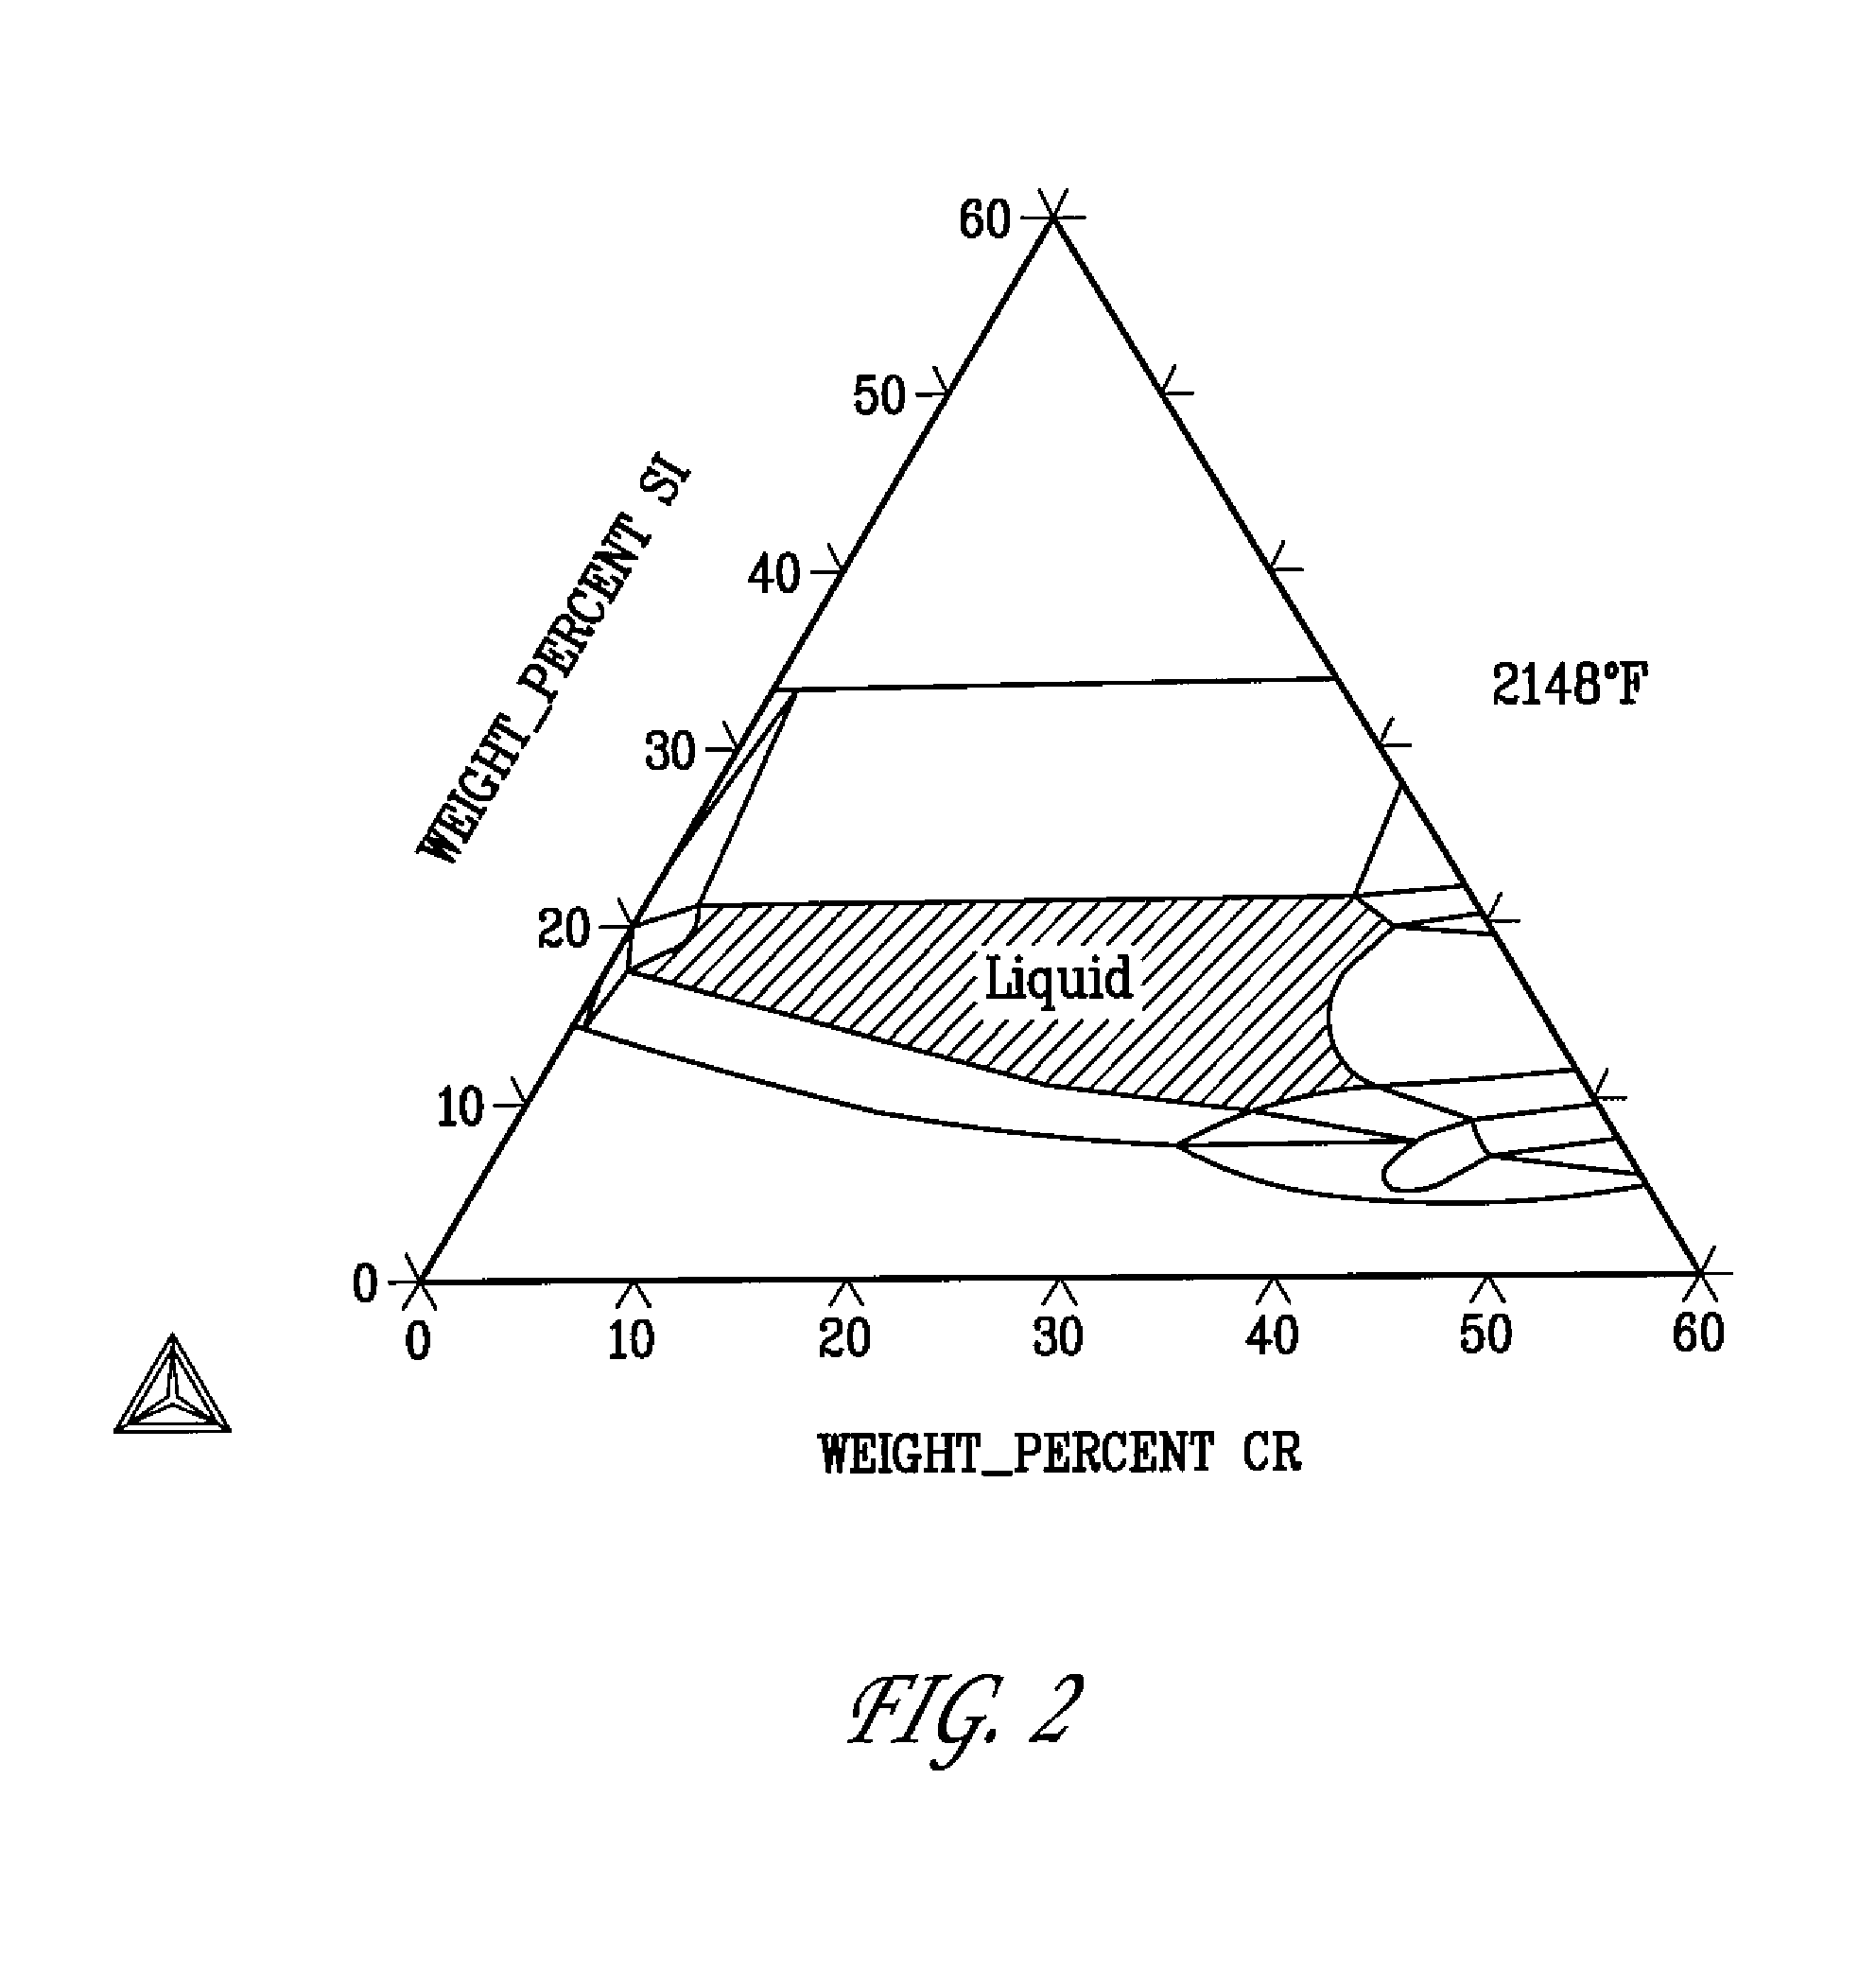 Powder metallurgical compositions and methods for making the same